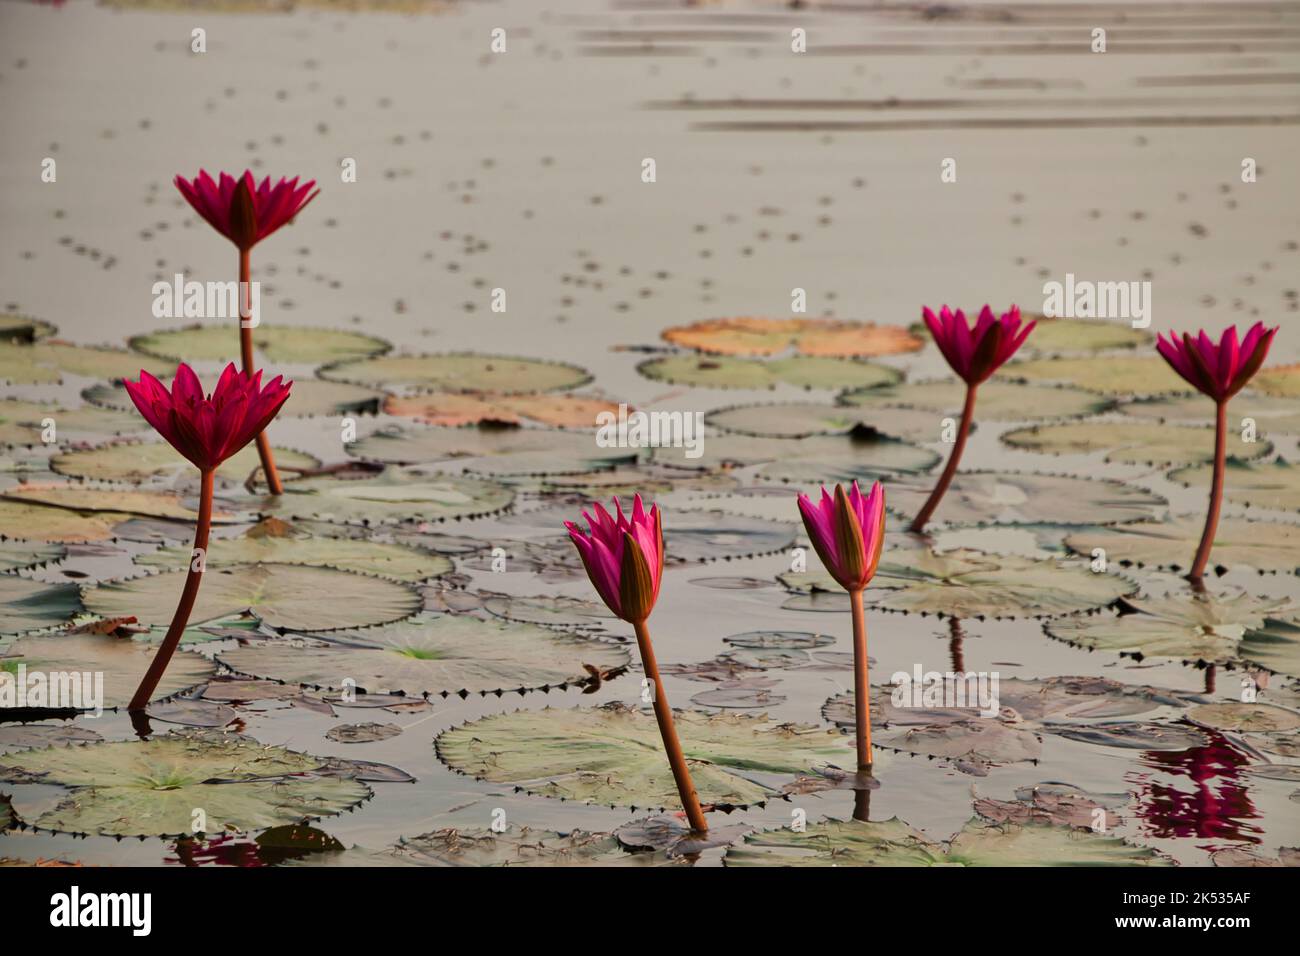 Cambodia, Siem Reap province, Angkor temples, listed as World Heritage by UNESCO, dark pink water lily (Latin - Nymphaea) bloom in a basin in the temp Stock Photo